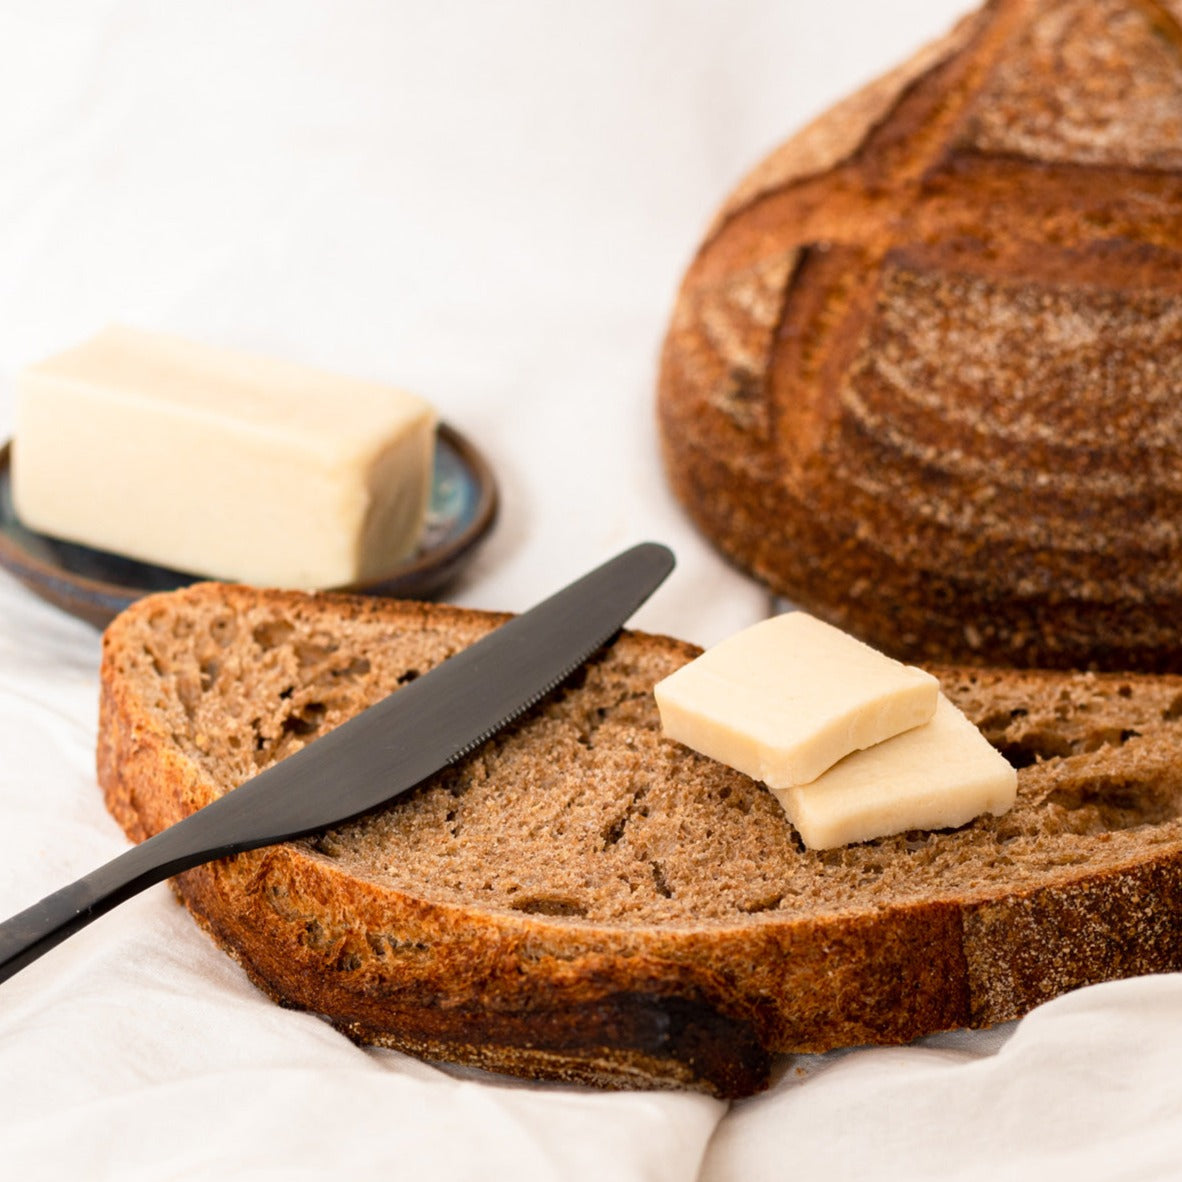 Bread with Nuts For Butter™ Organic & dairy-free fermented Salted Original butter